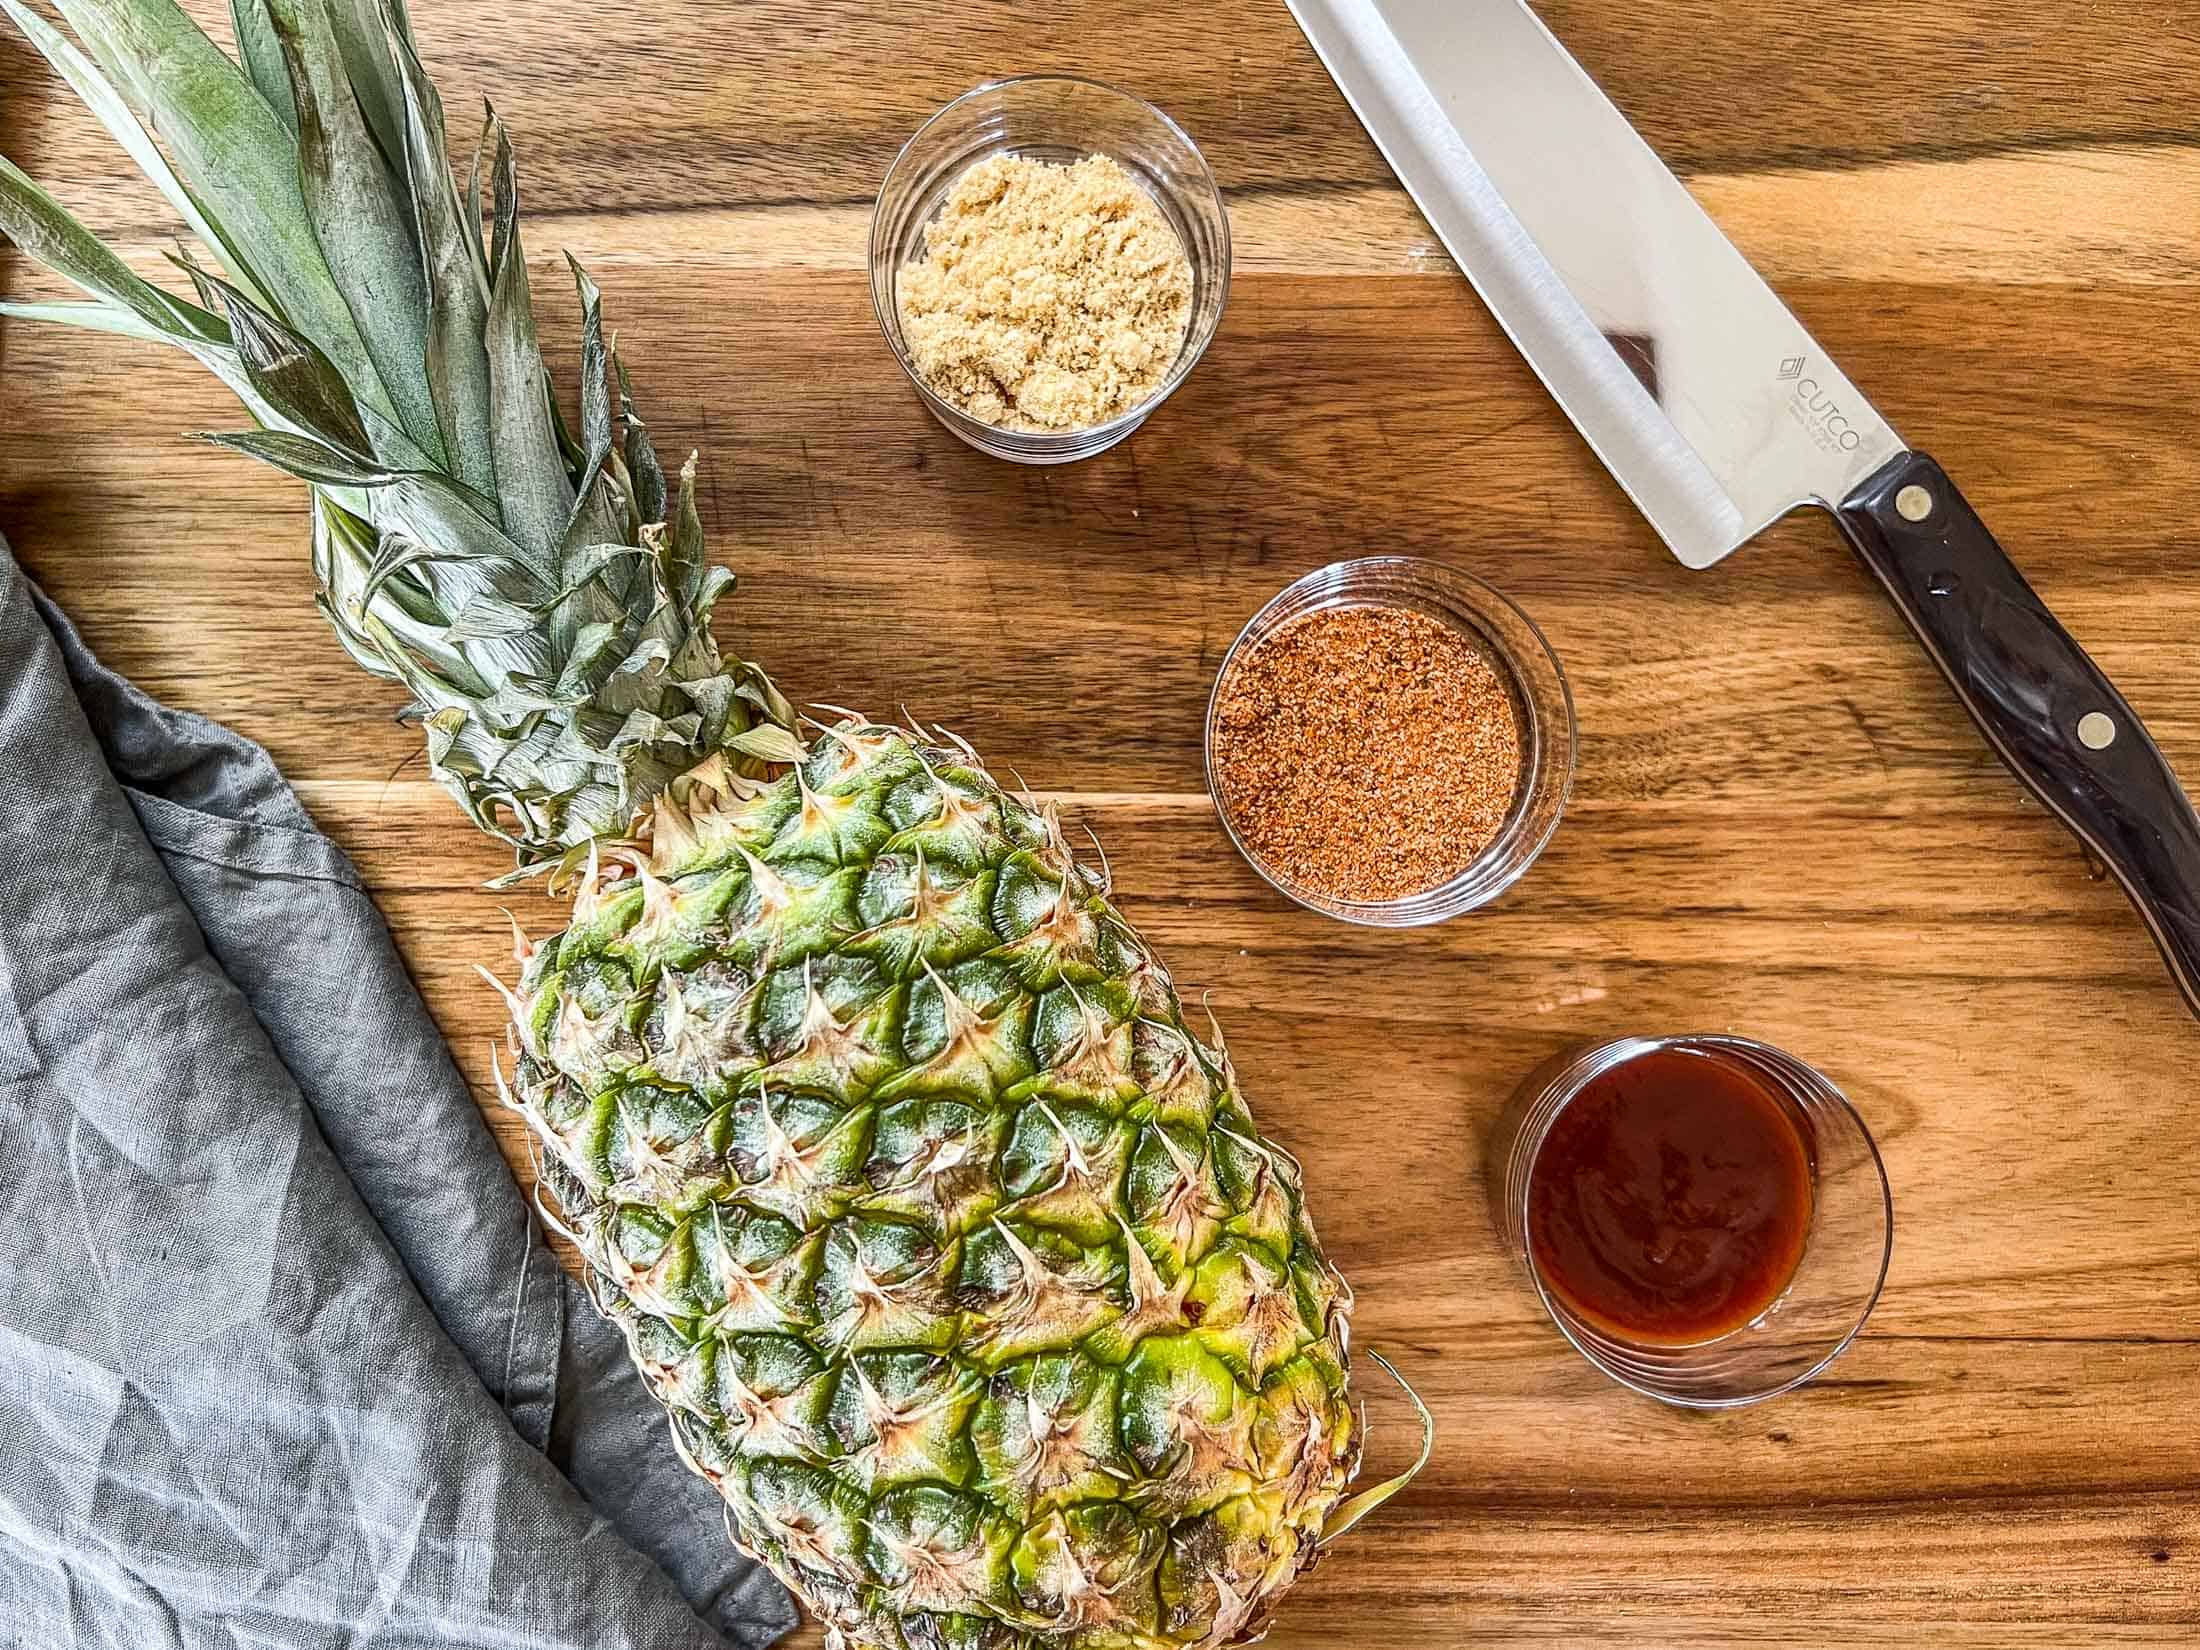 Key ingredients for smoked pineapple.